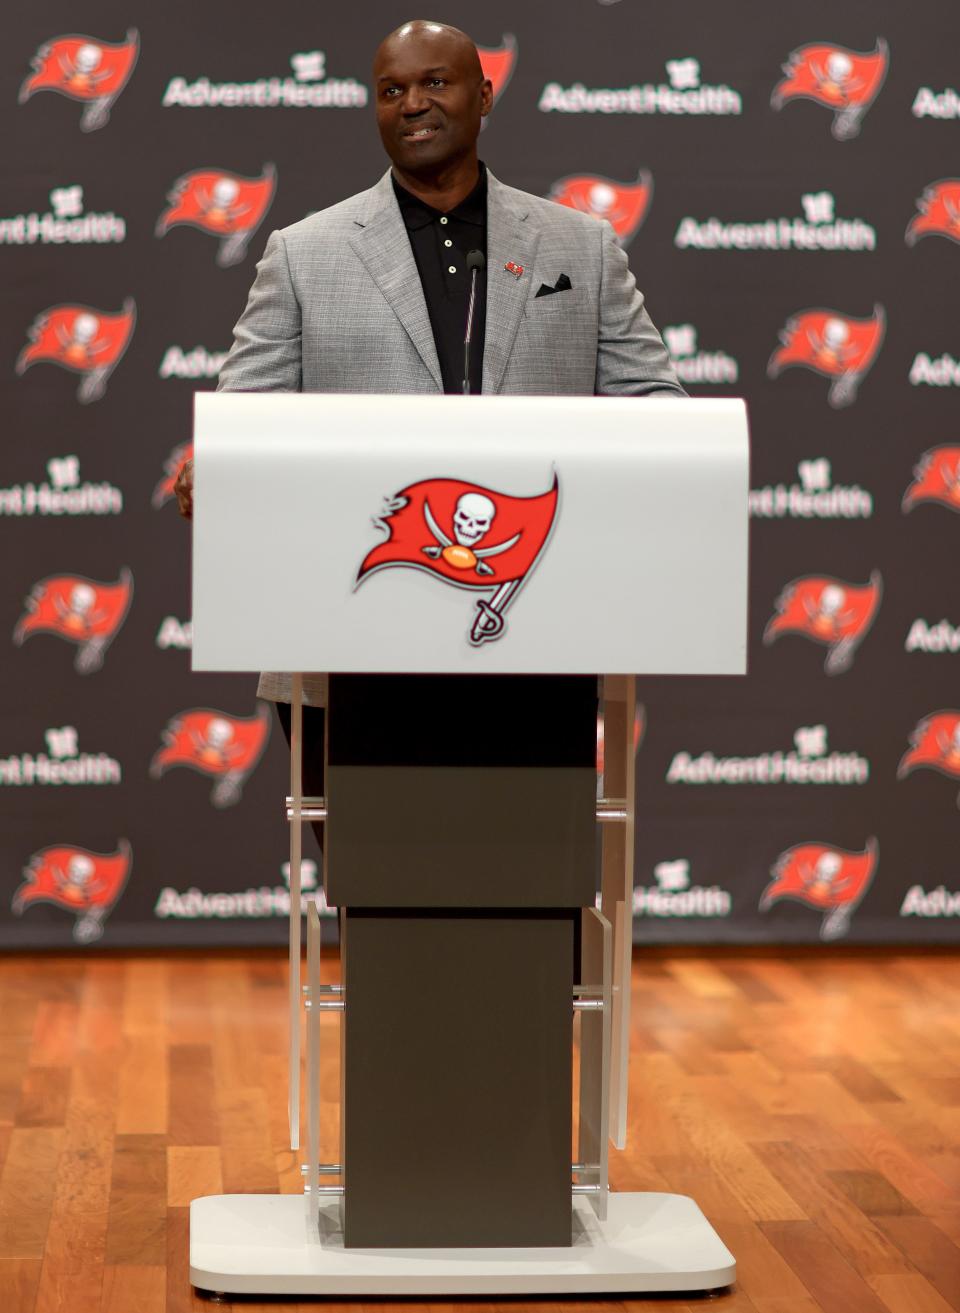 Todd Bowles speaks at a press conference introducing him as the new head coach of the Tampa Bay Buccaneers.